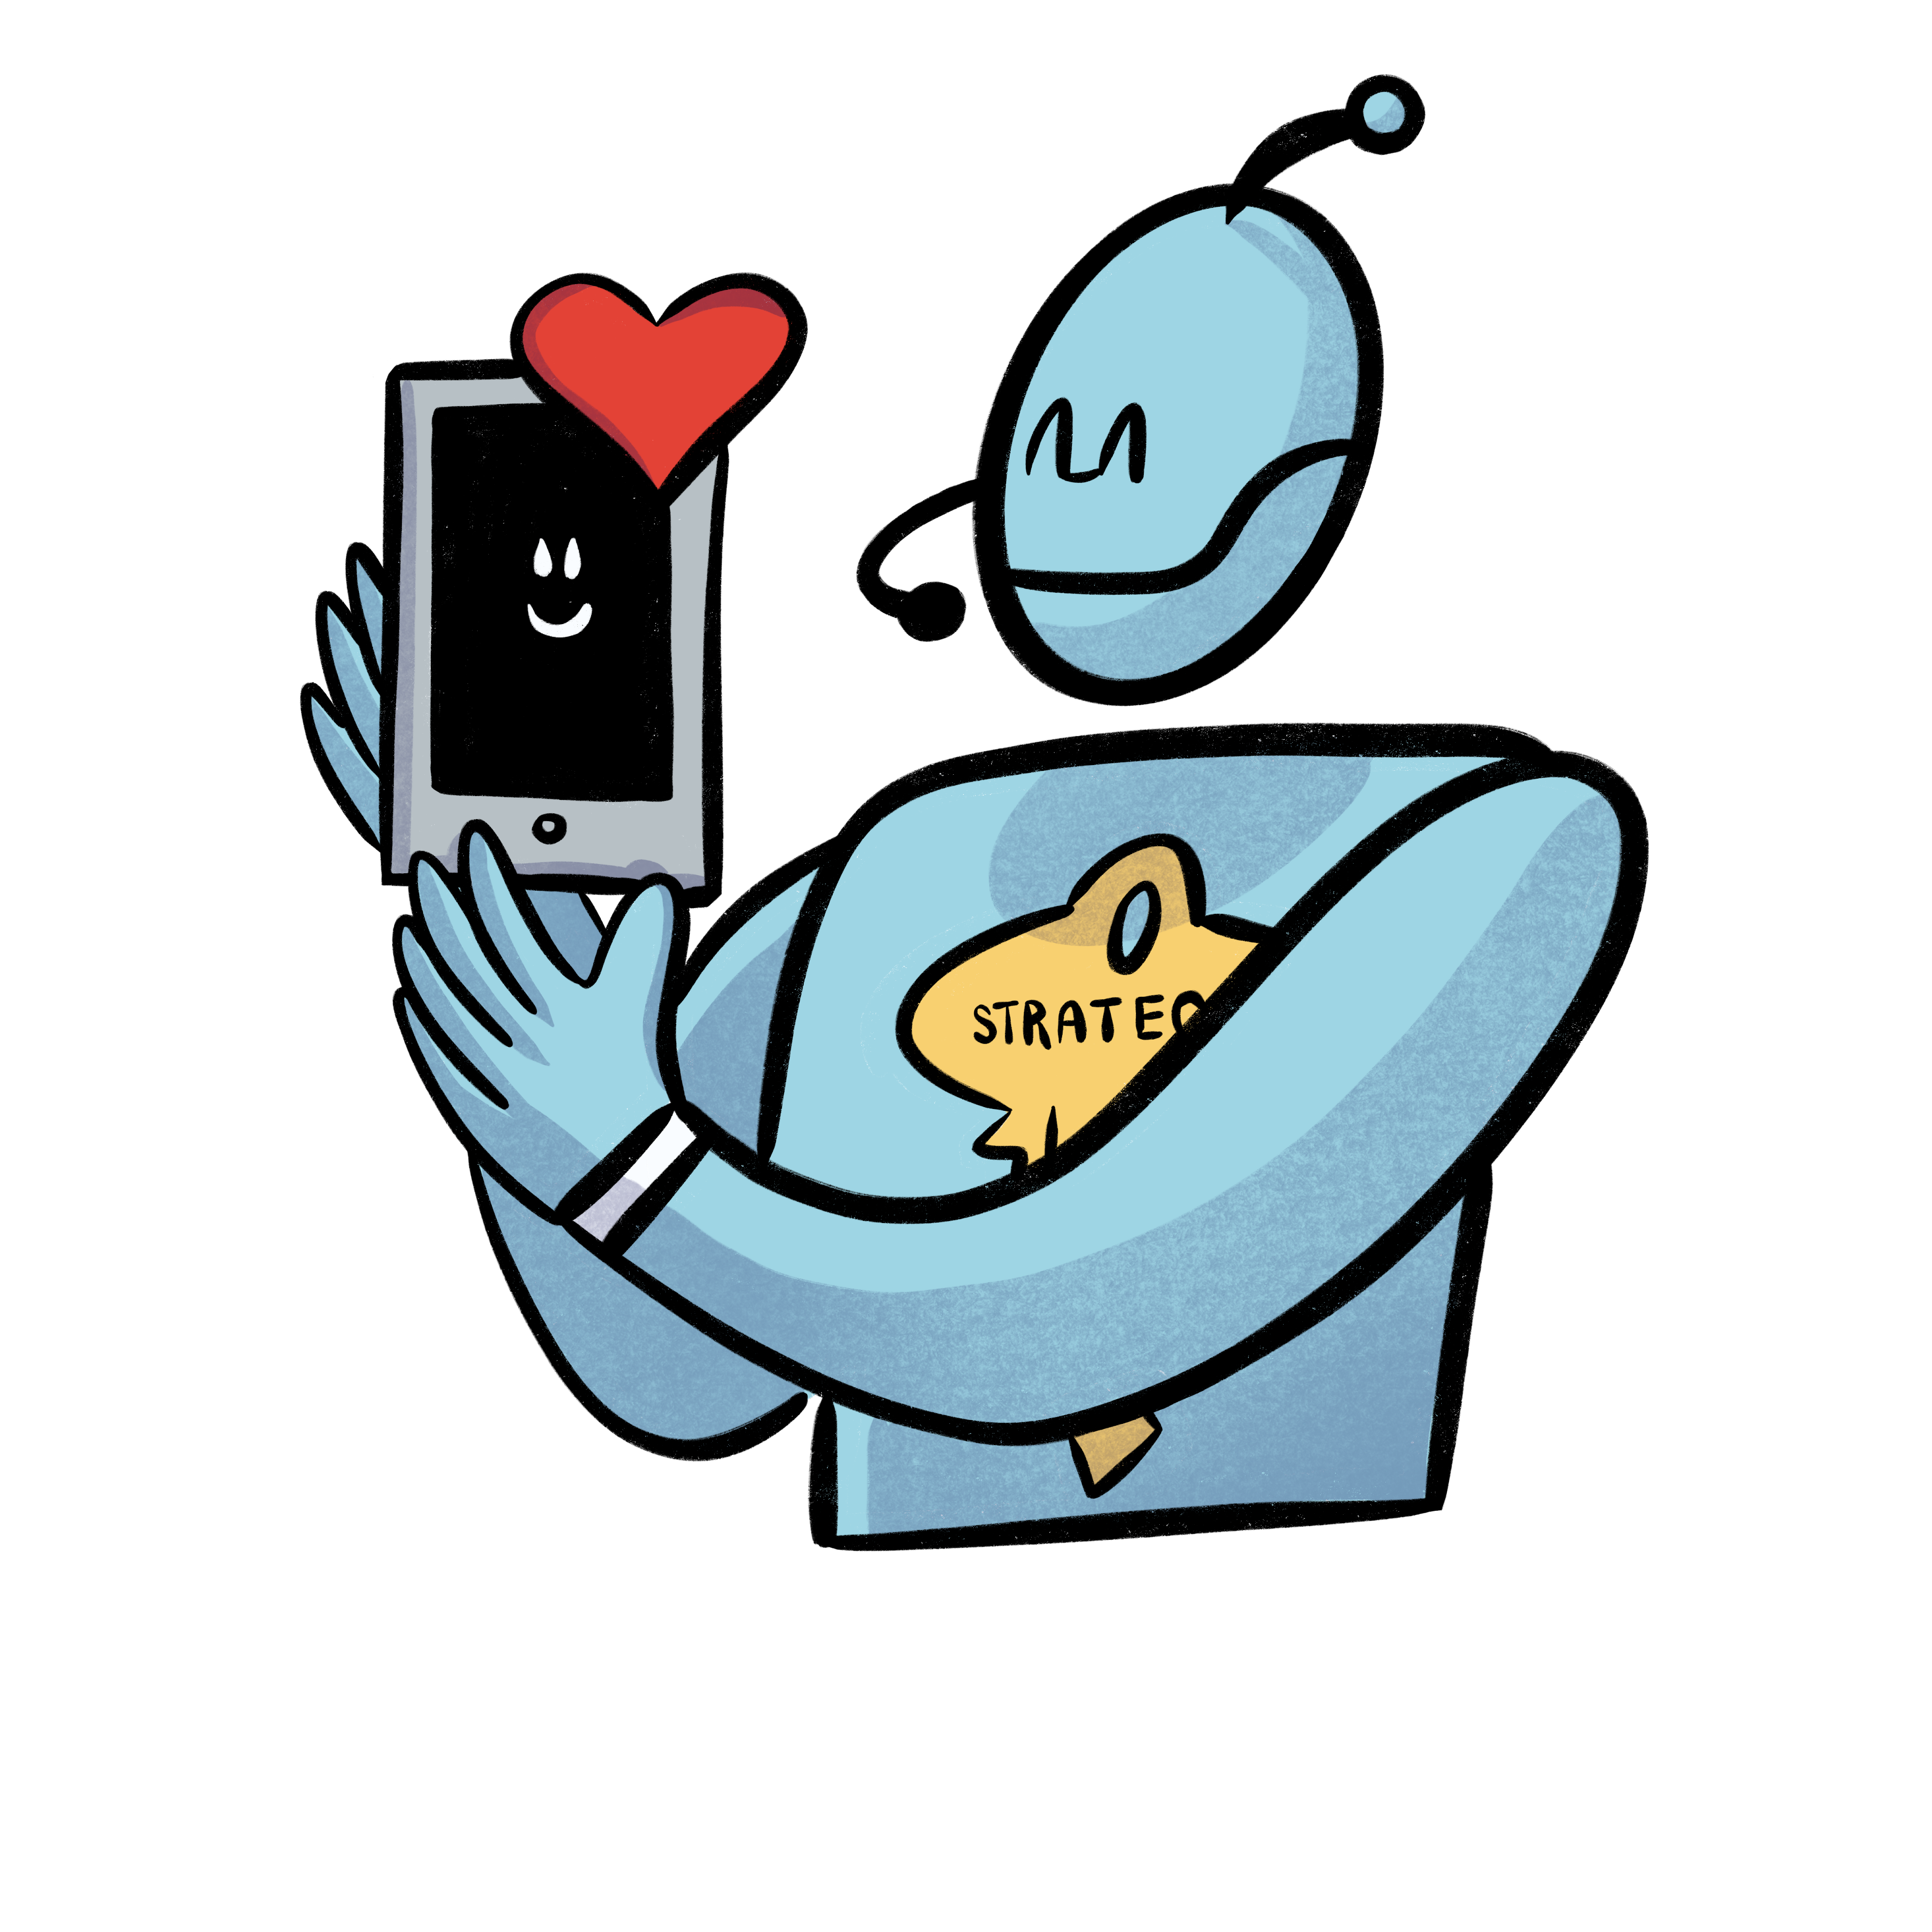 An image of a robot holding a frame with a red heart